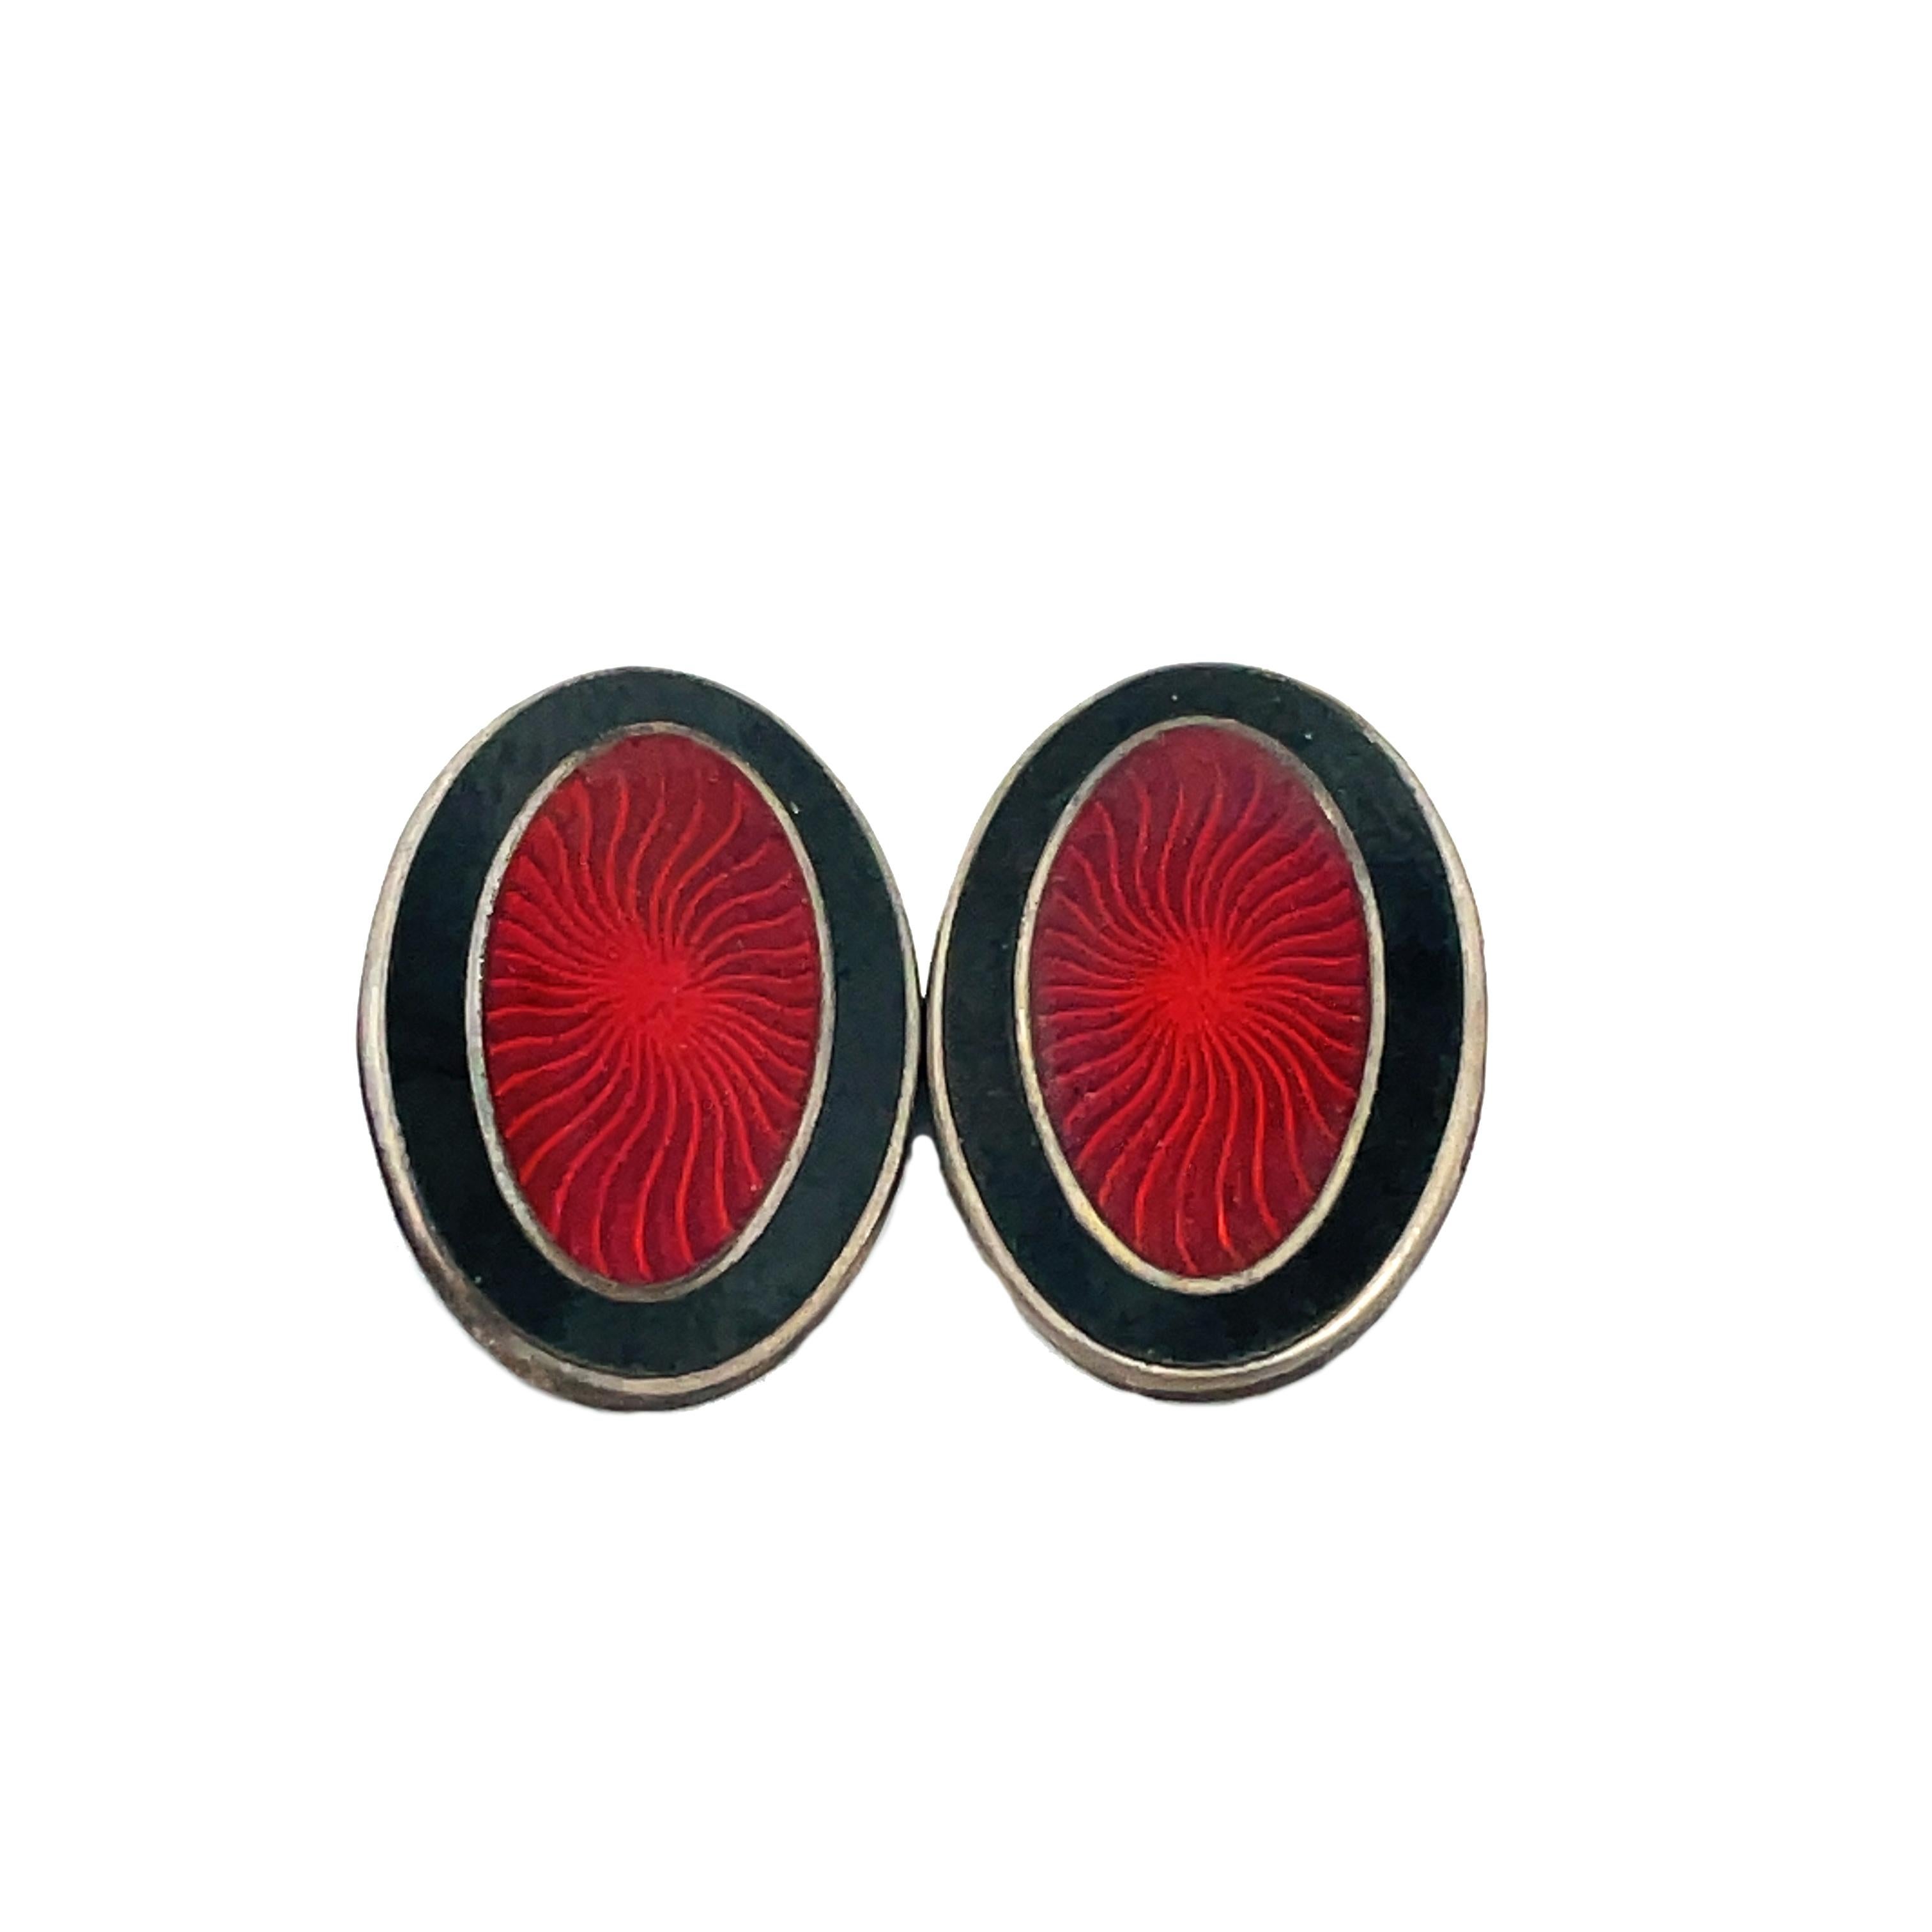 1925 Art Deco Red and Black Enamel Sterling Silver Cufflinks In Good Condition For Sale In Lexington, KY